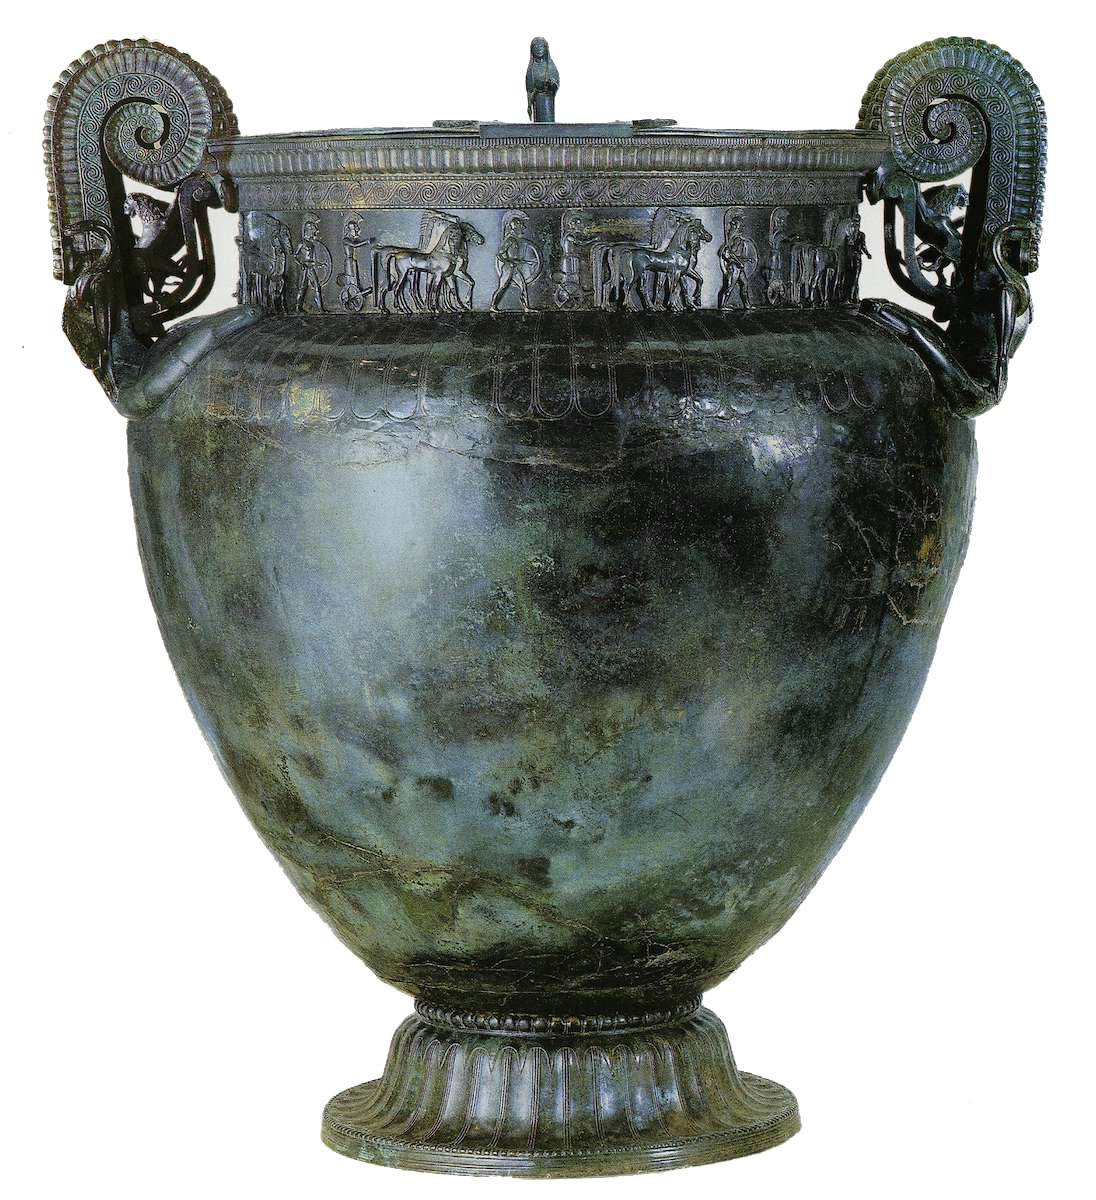 14 Popular Native American Vase Pottery 2024 free download native american vase pottery of toward the derveni krater artistry in bronze inside figure 26 1 bronze volute krater from vix burgundy france greek laconian ca 570 bc chatallon sur seine mus